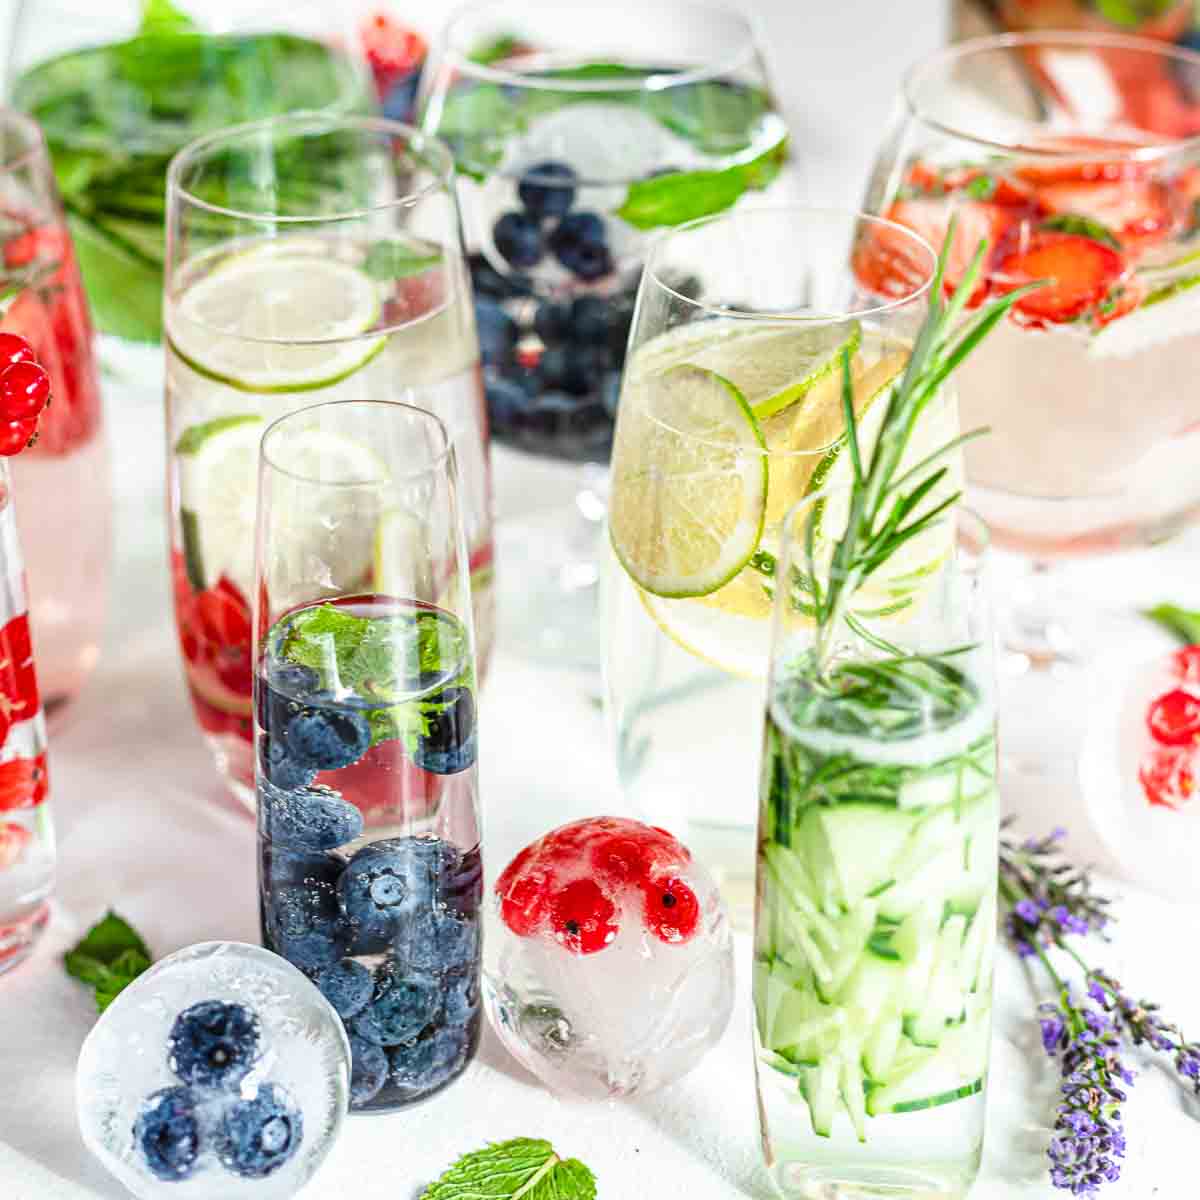 A table full of iced drinks with berries and mint.